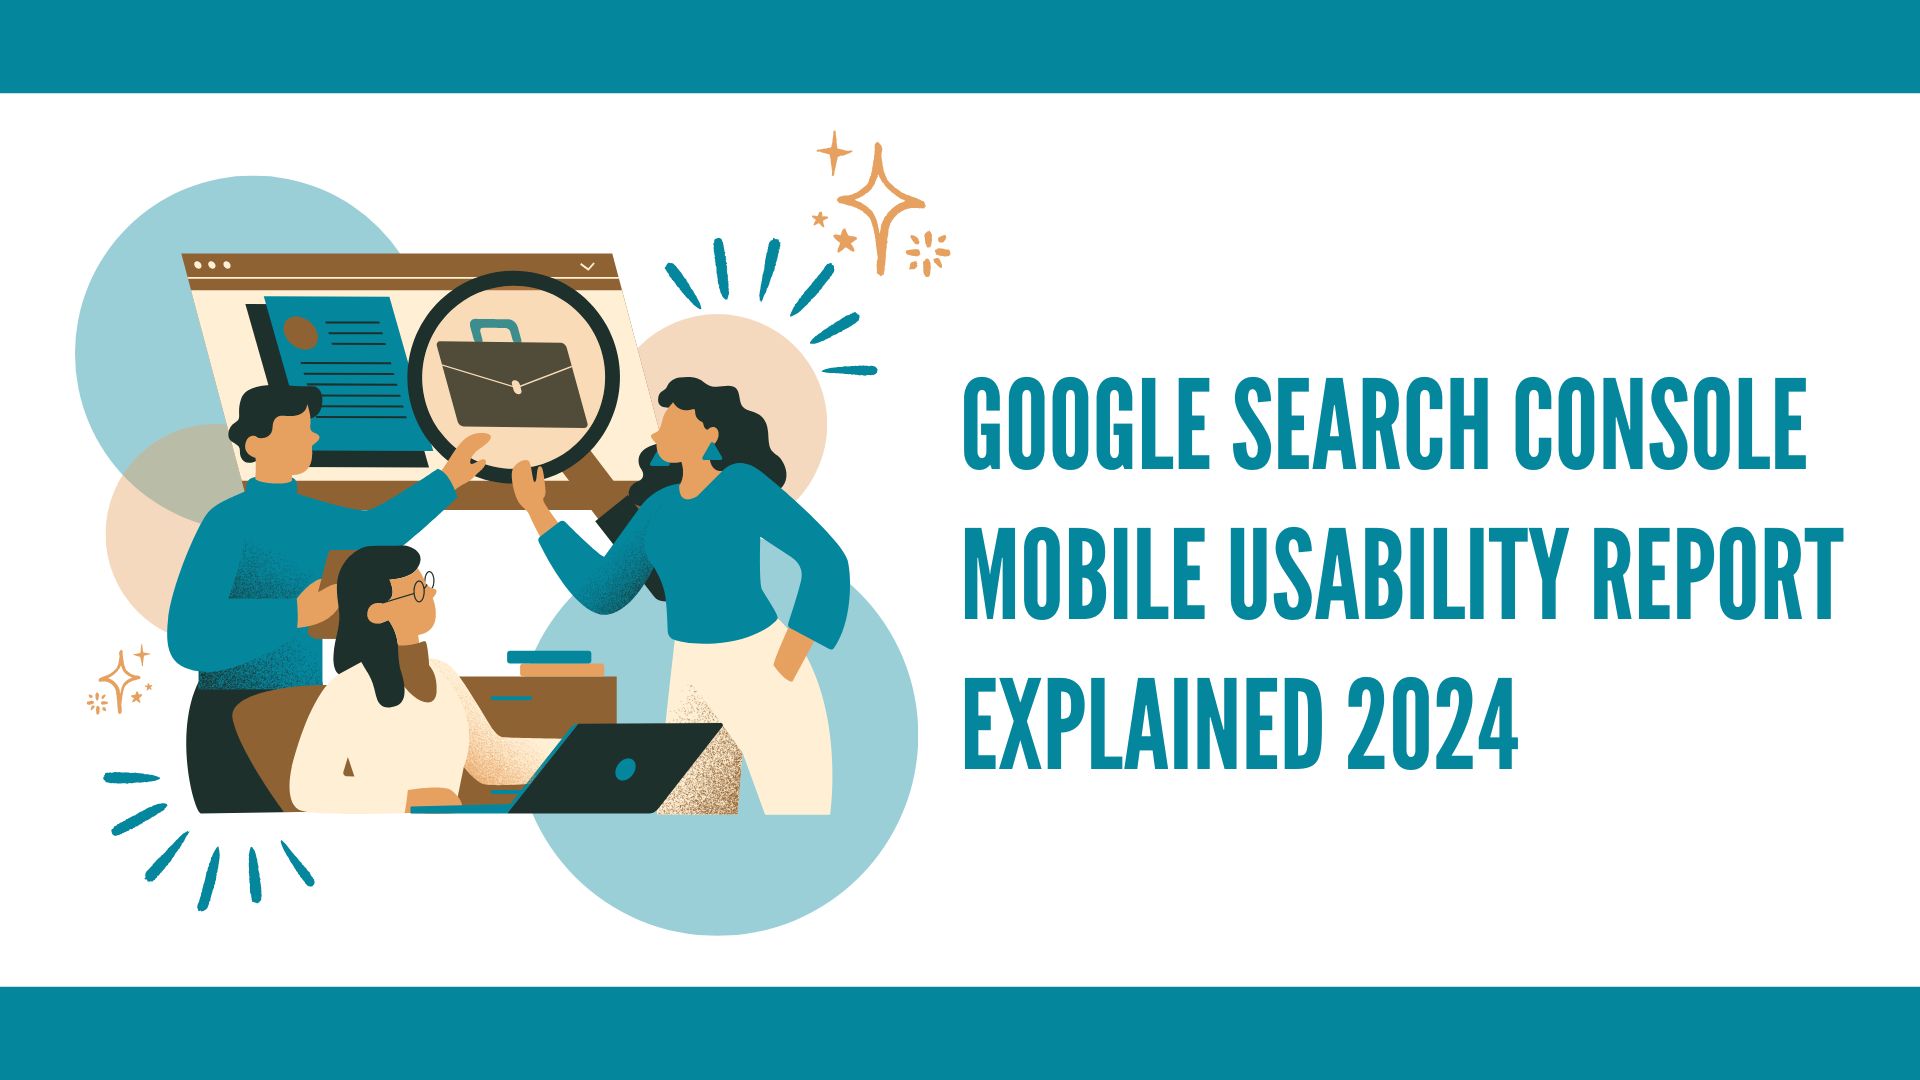 Google Search Console Mobile Usability Report Explained 2024